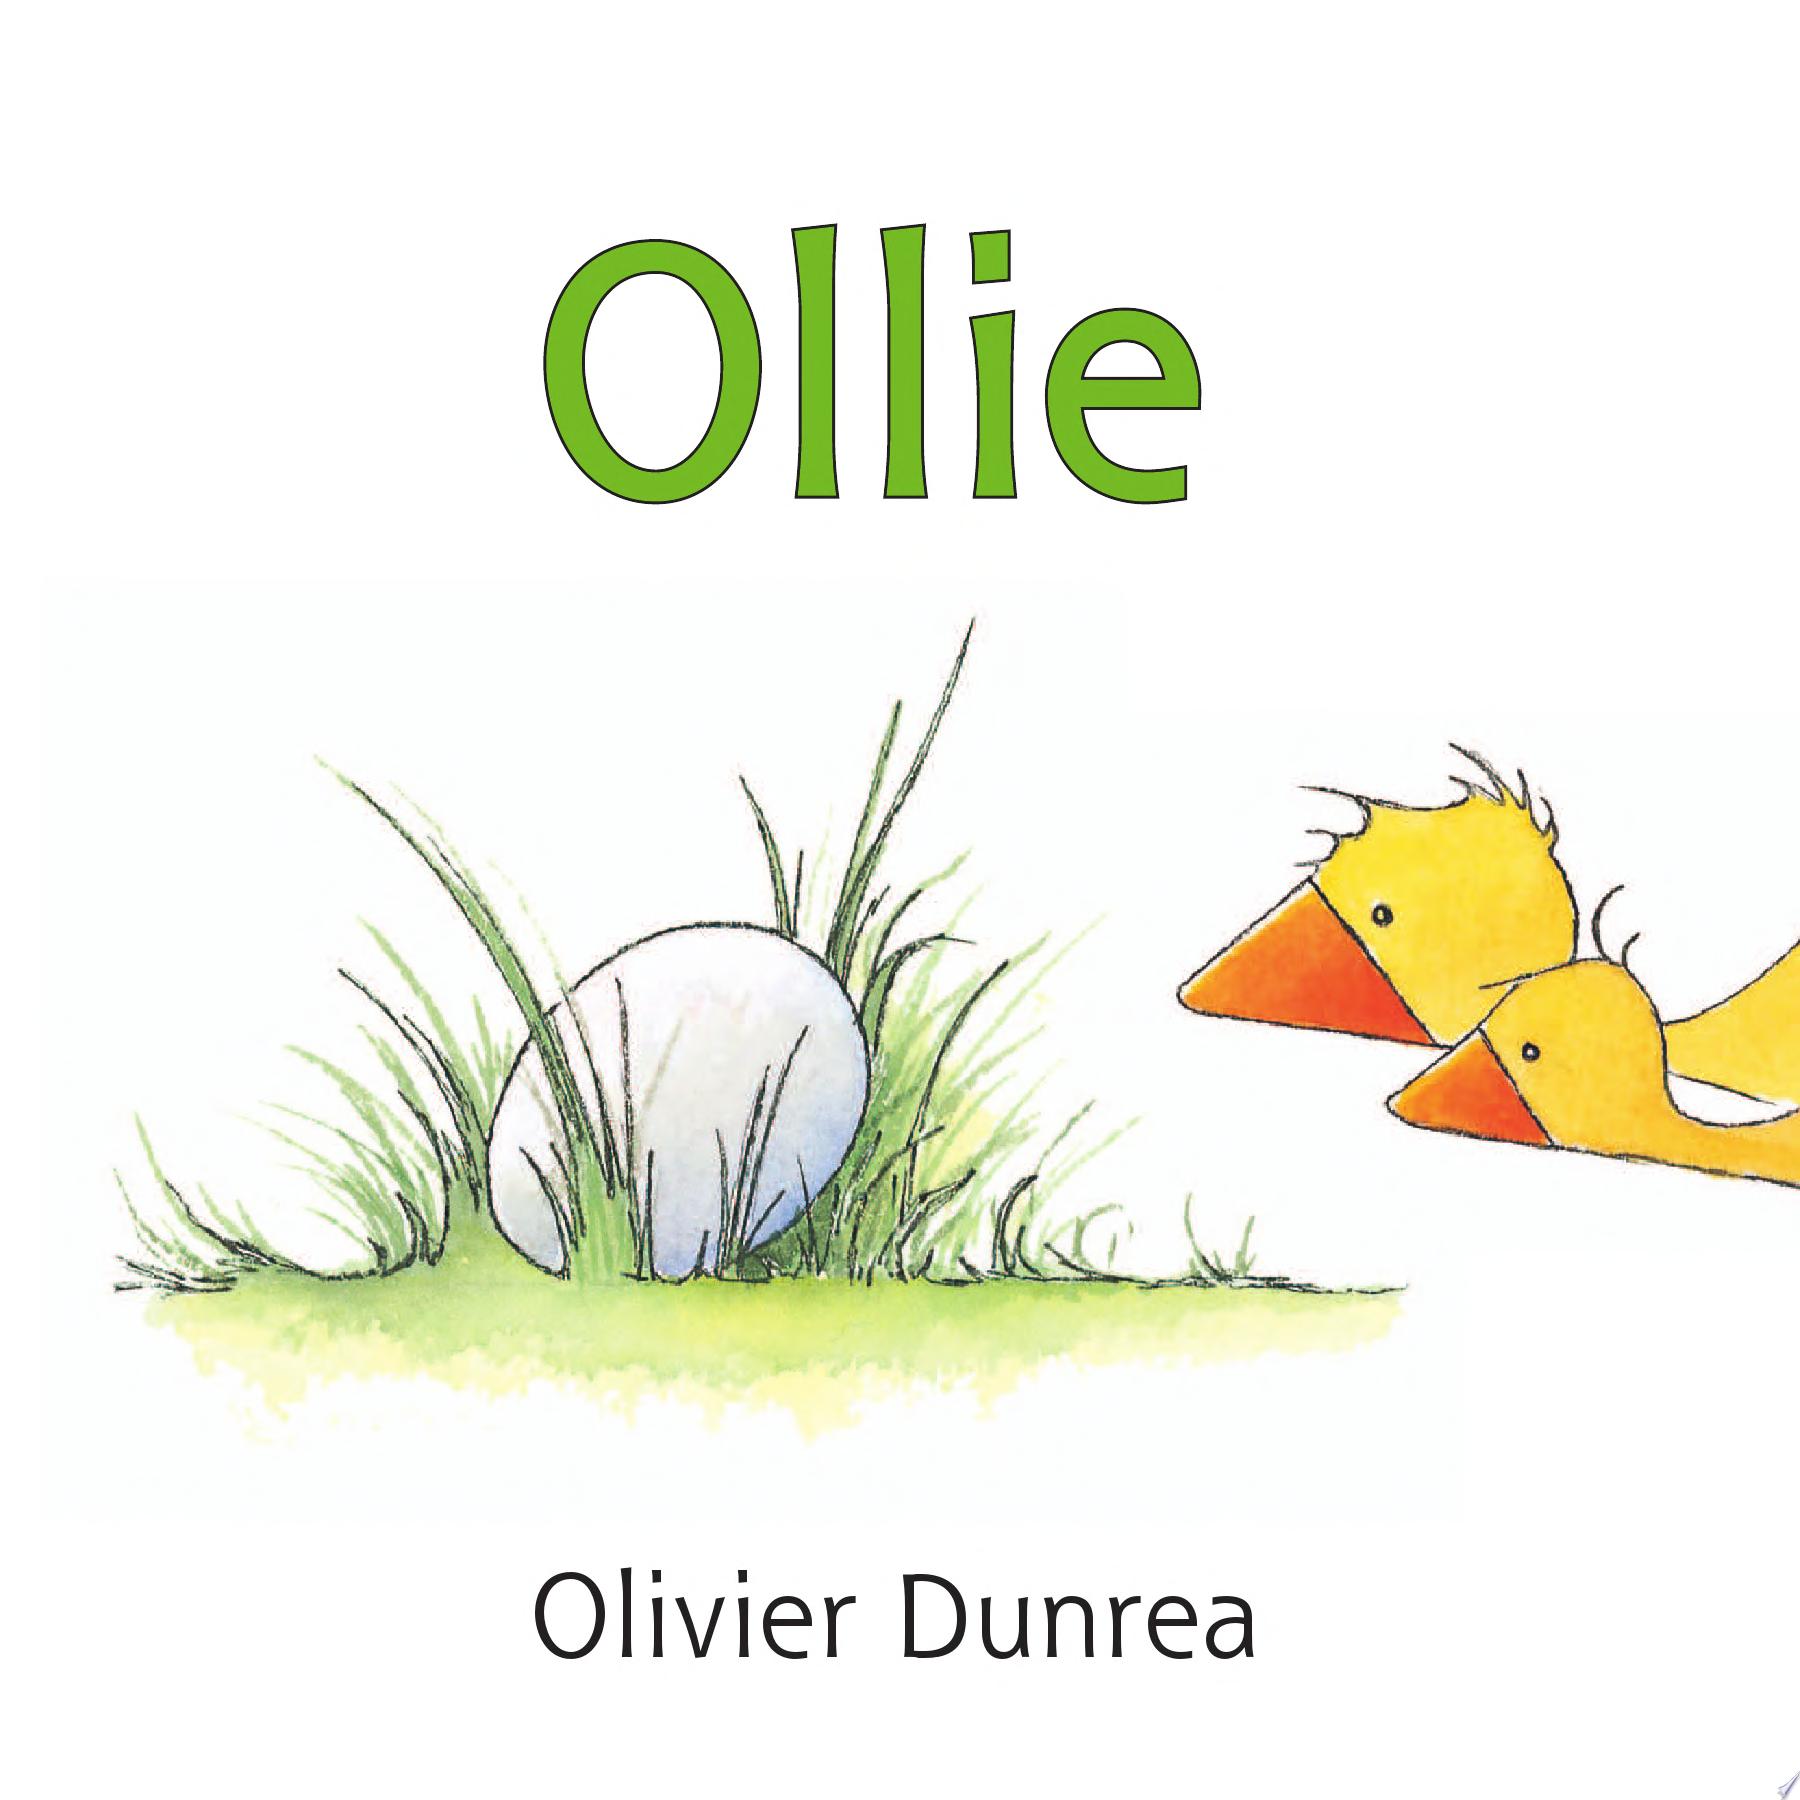 Image for "Ollie"